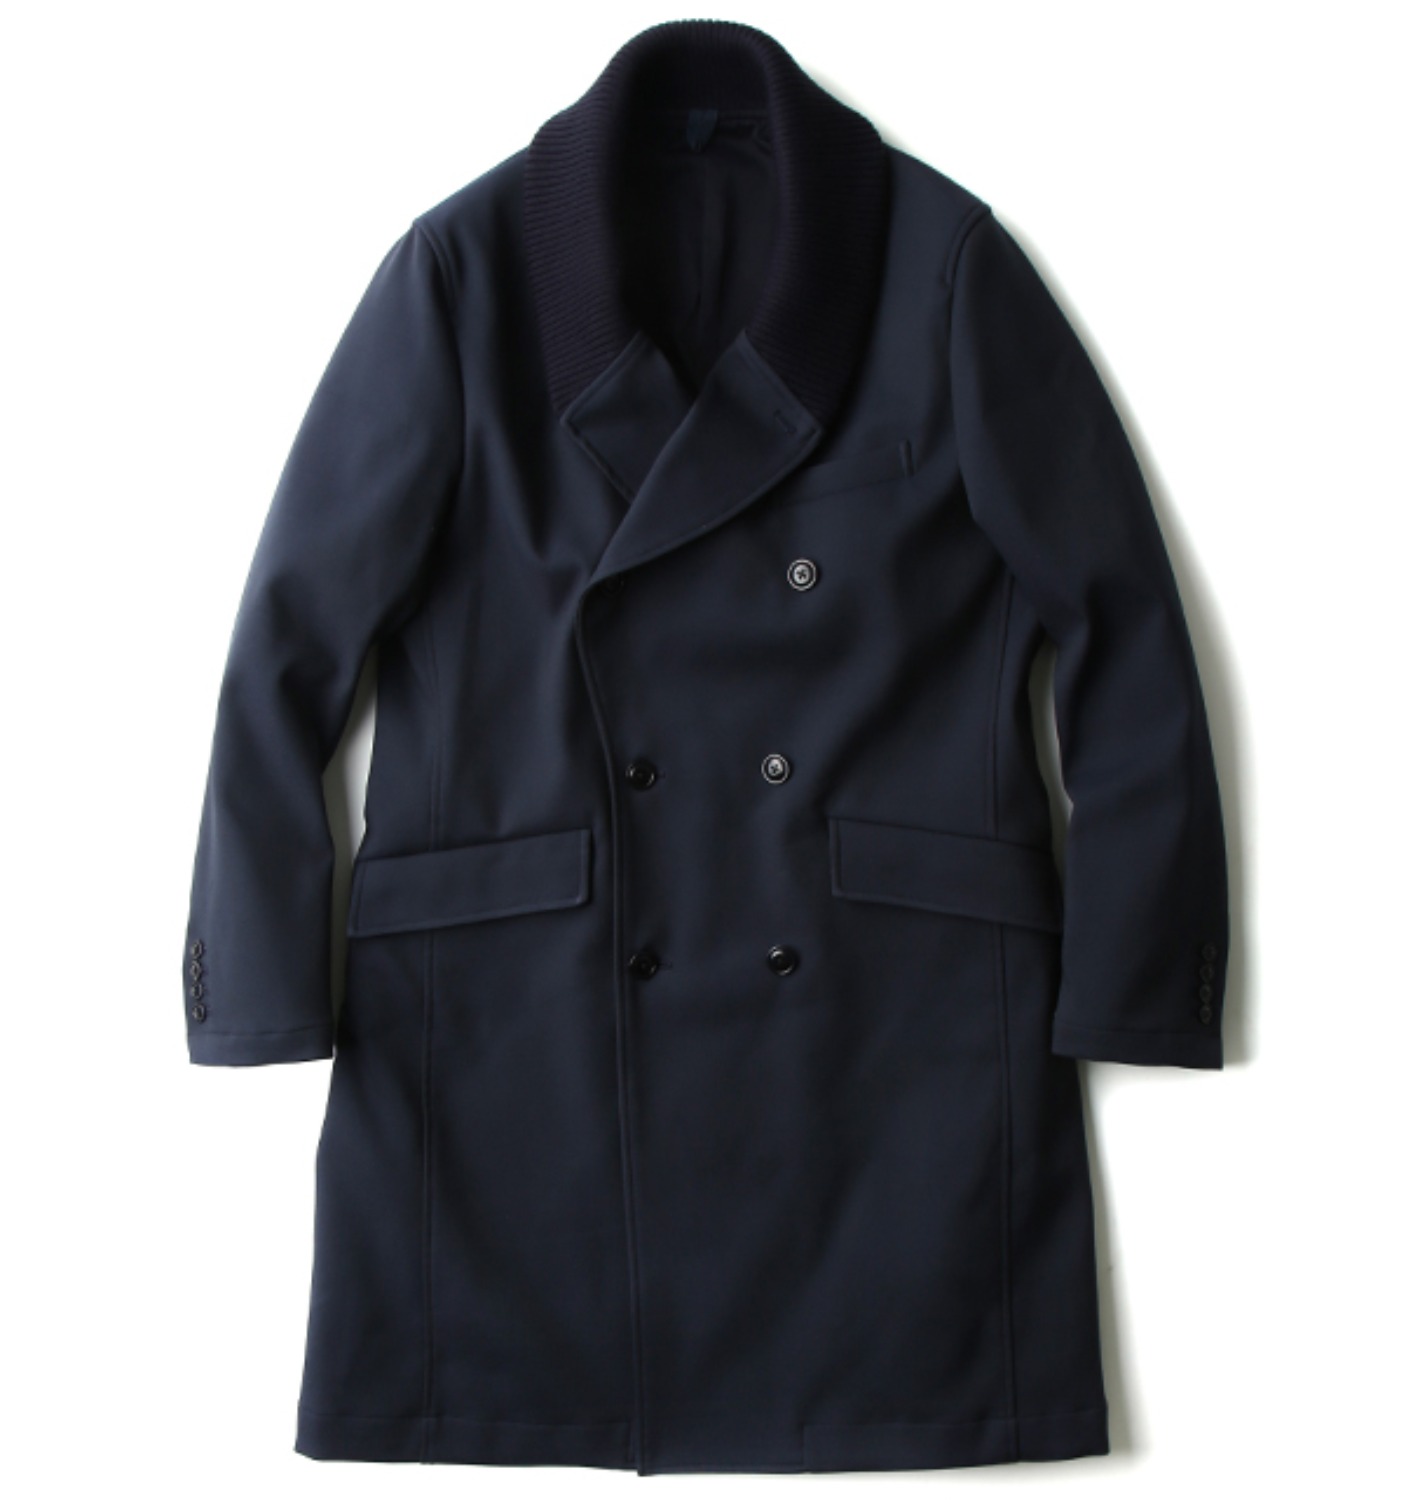 KNIT COLLAR DOUBLE-BRREASTED CHESTERFIELD COAT NAVY(KT37DC02)